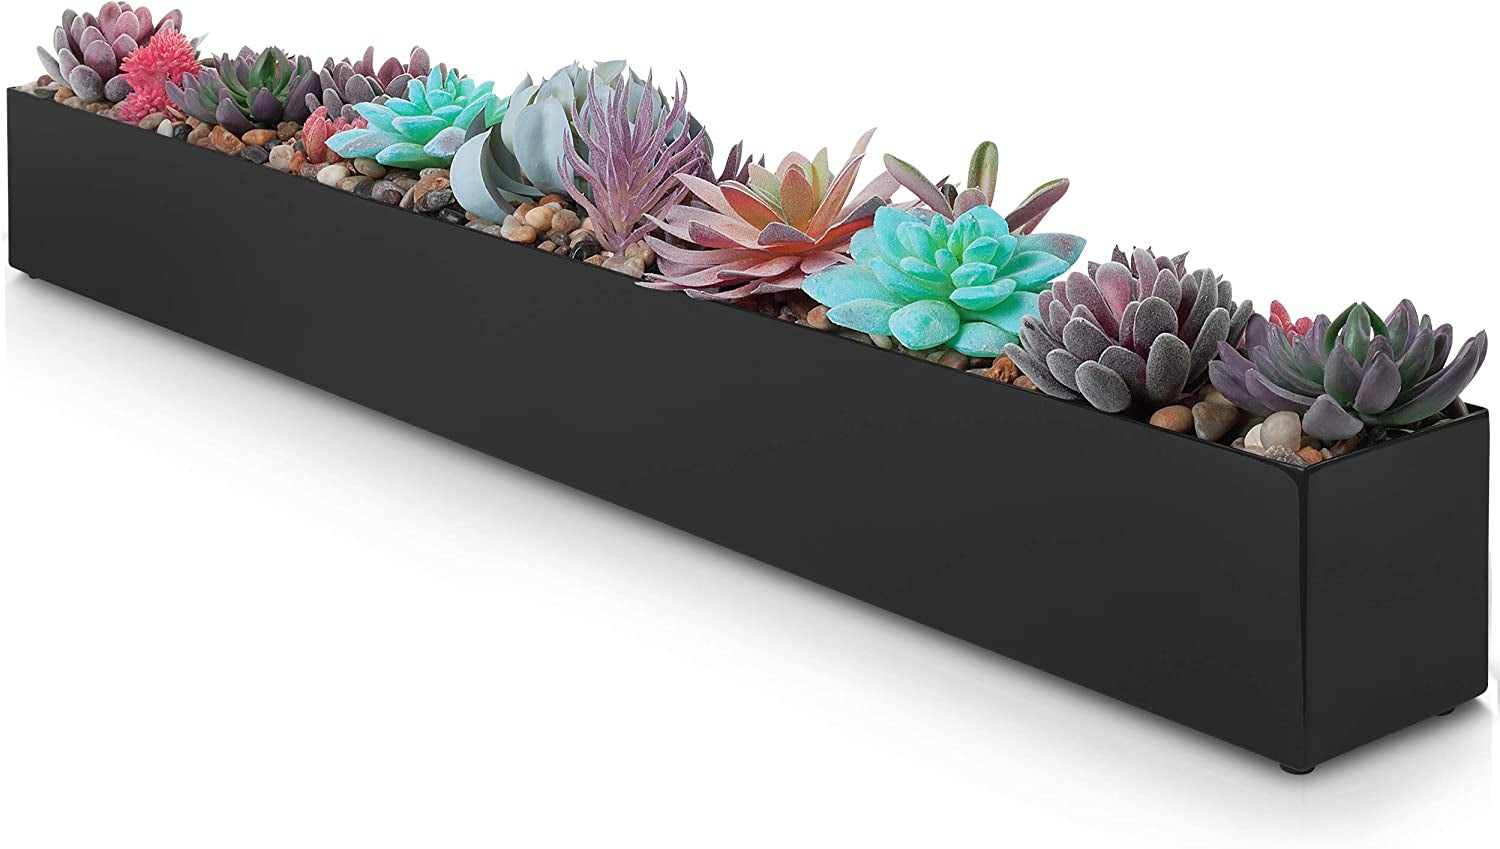 DR&Co, Modern Rectangle Planter Box - 32" Metal Planter Ideal as a Long Succulent Planter | Rectangular Planter Box for Table or Window Sill Planters Indoor | Trough Planter for Indoor Window Planter | White